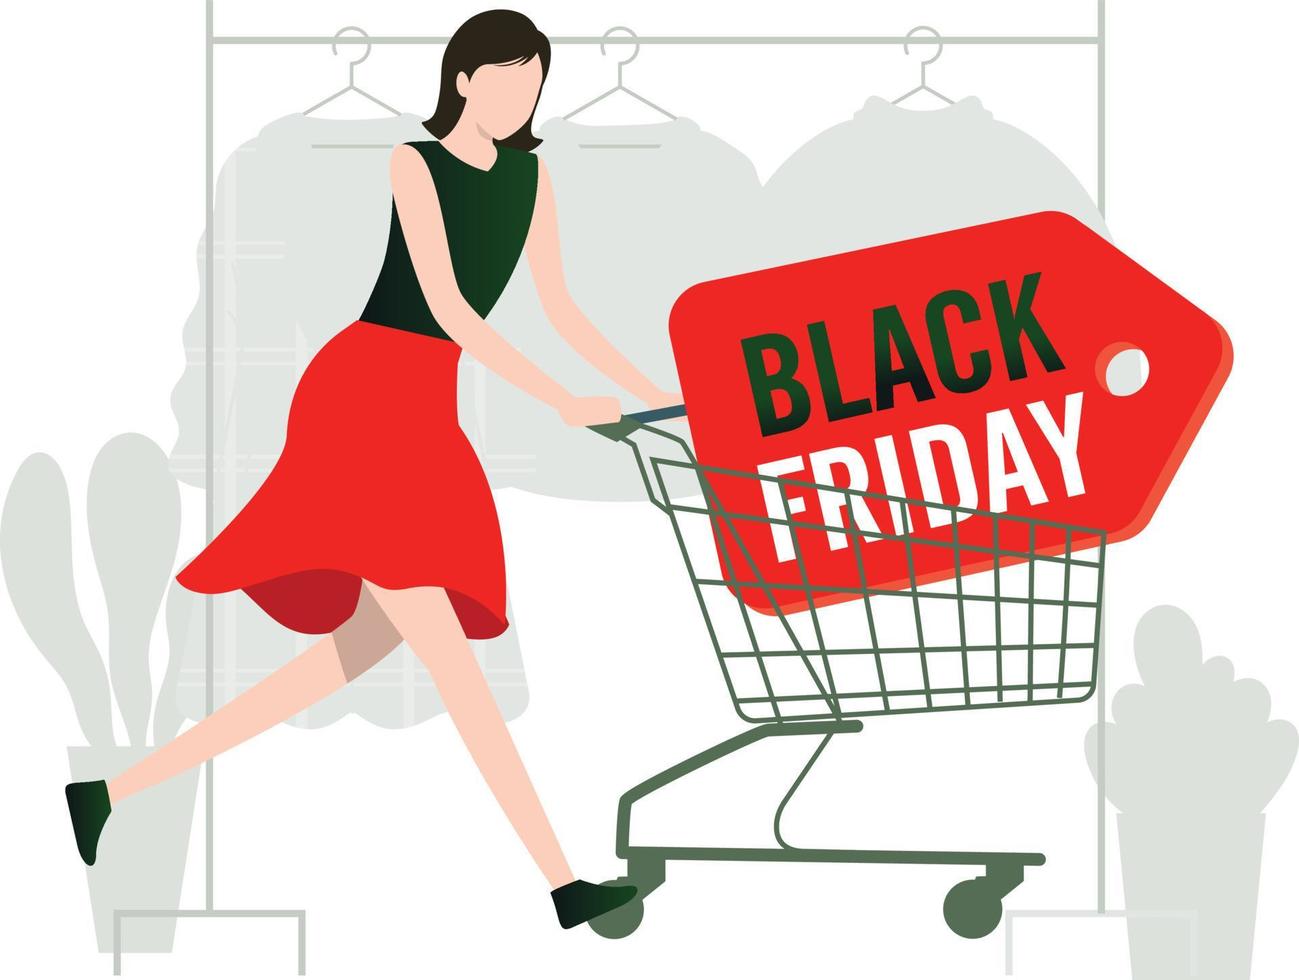 The girl is going to the Black Friday shopping sale. vector